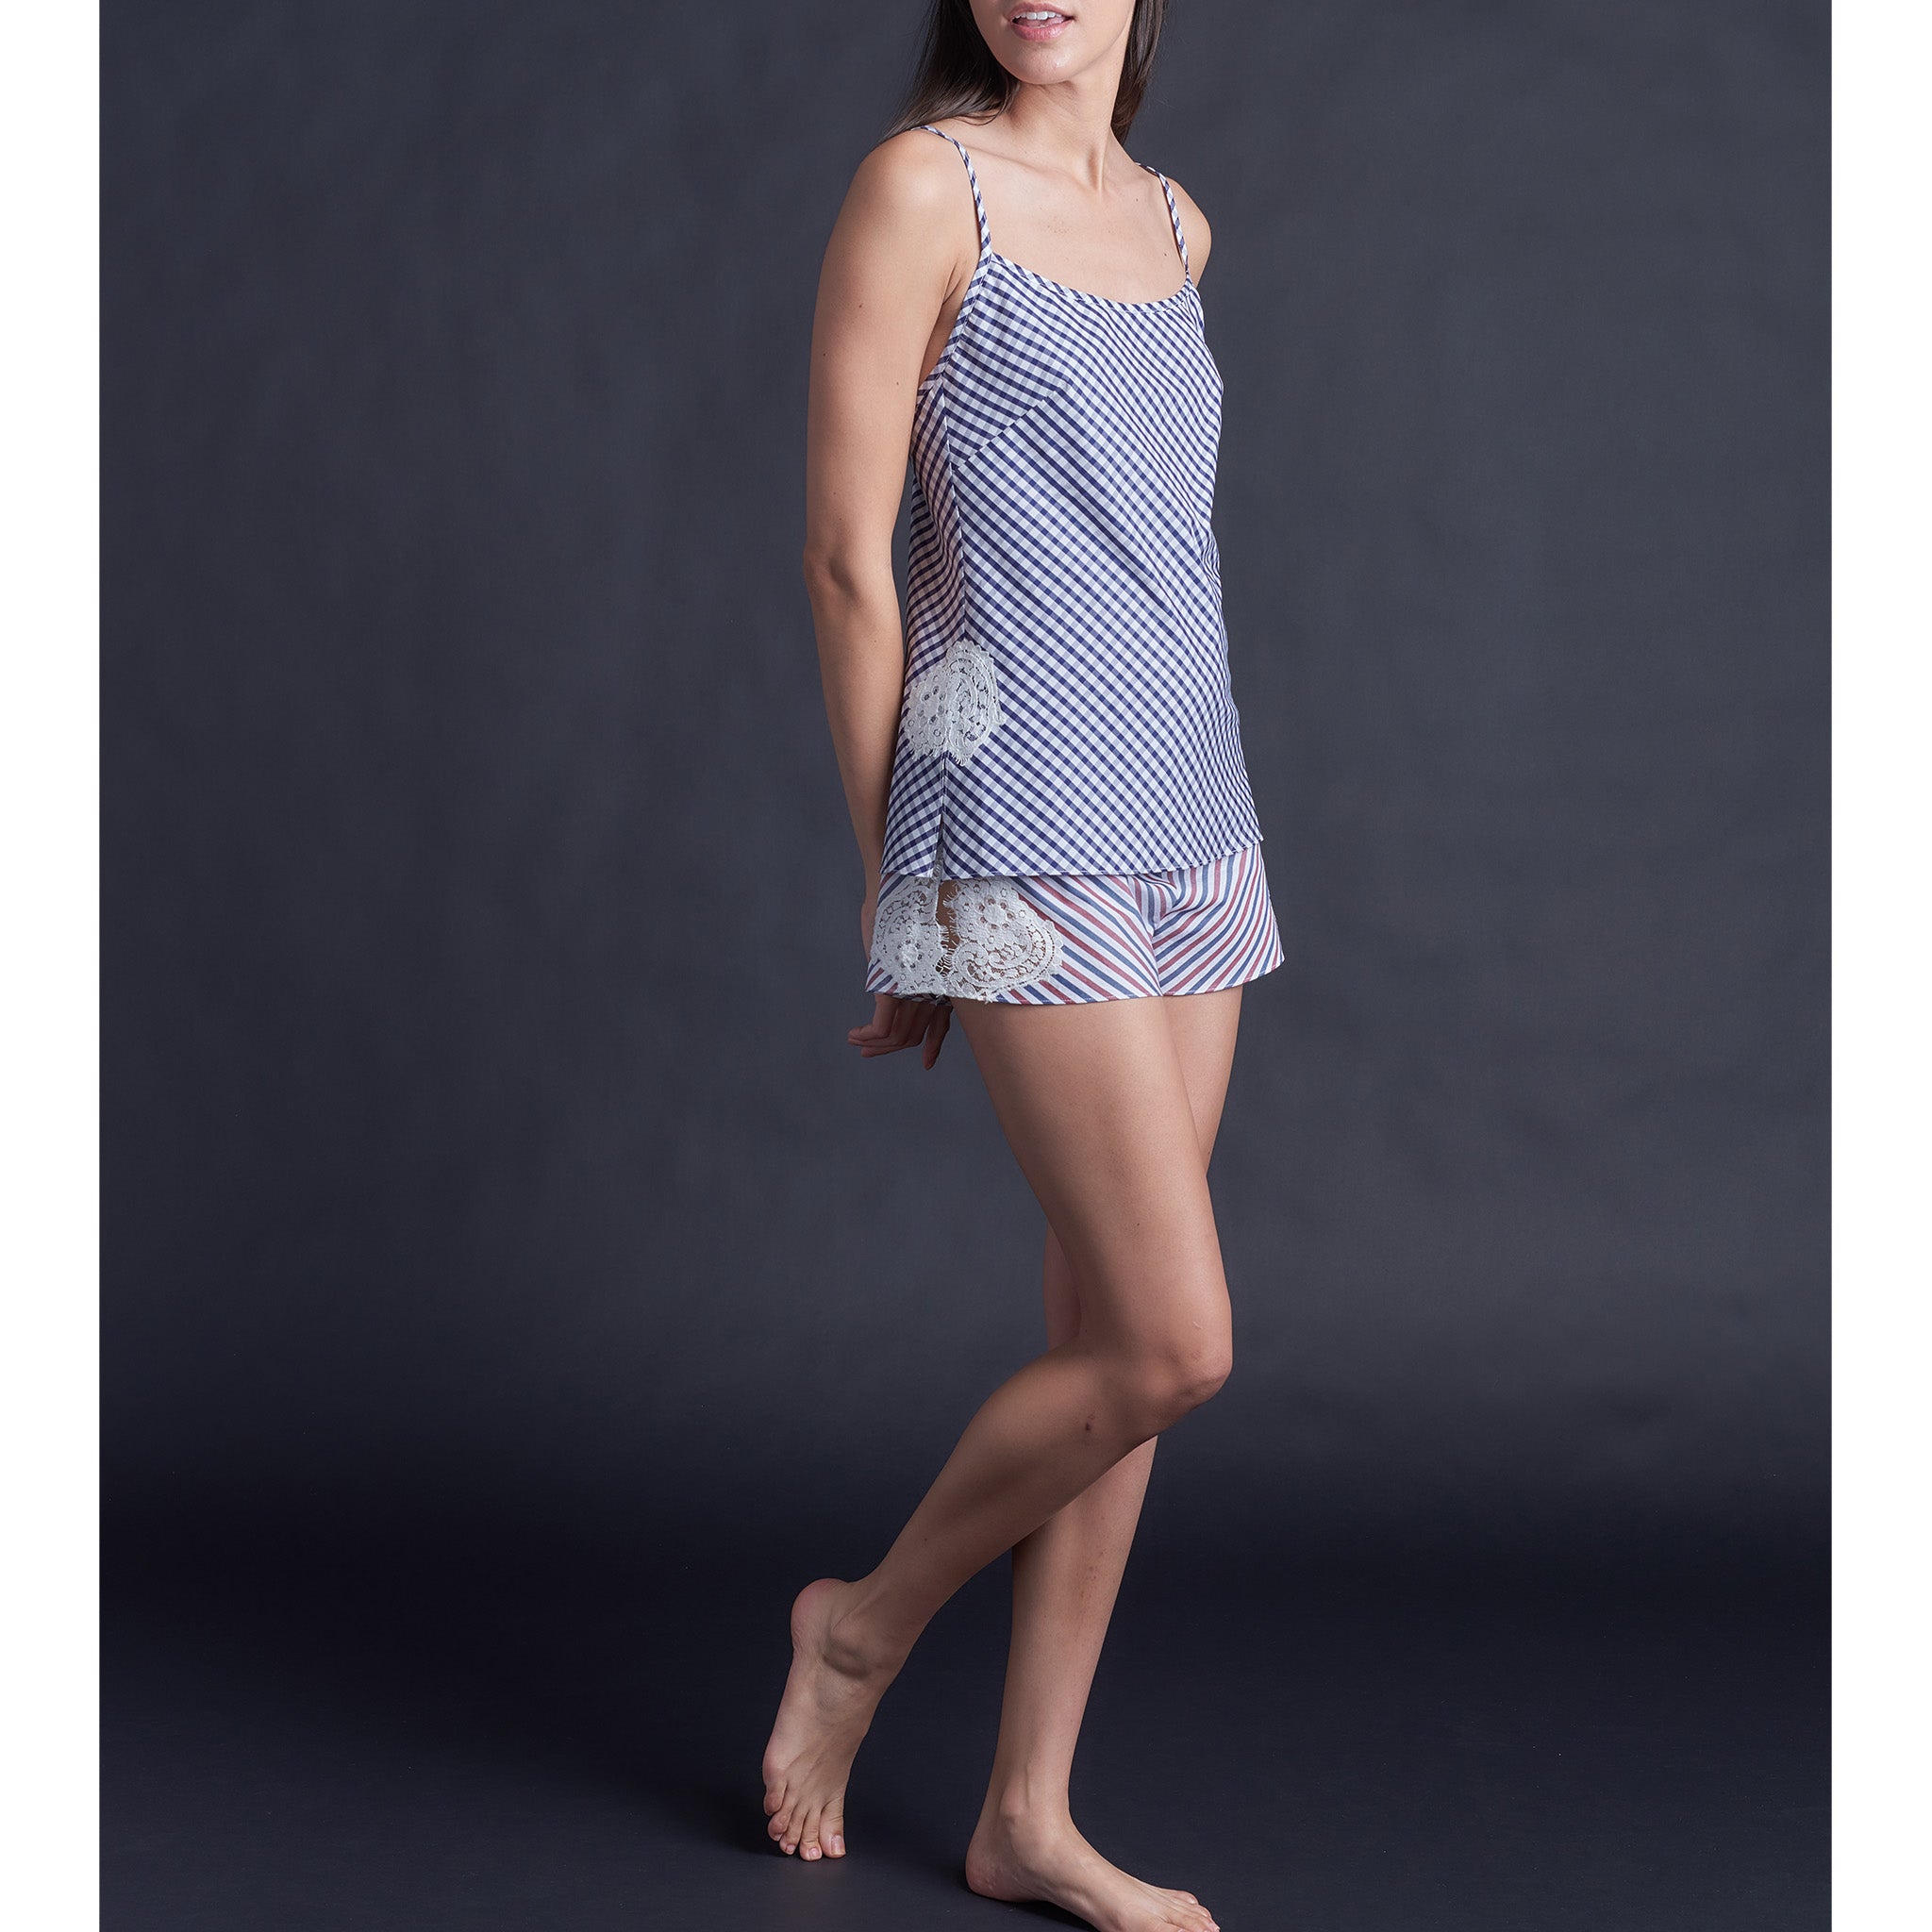 Olwen Camisole in Italian Navy Check Cotton